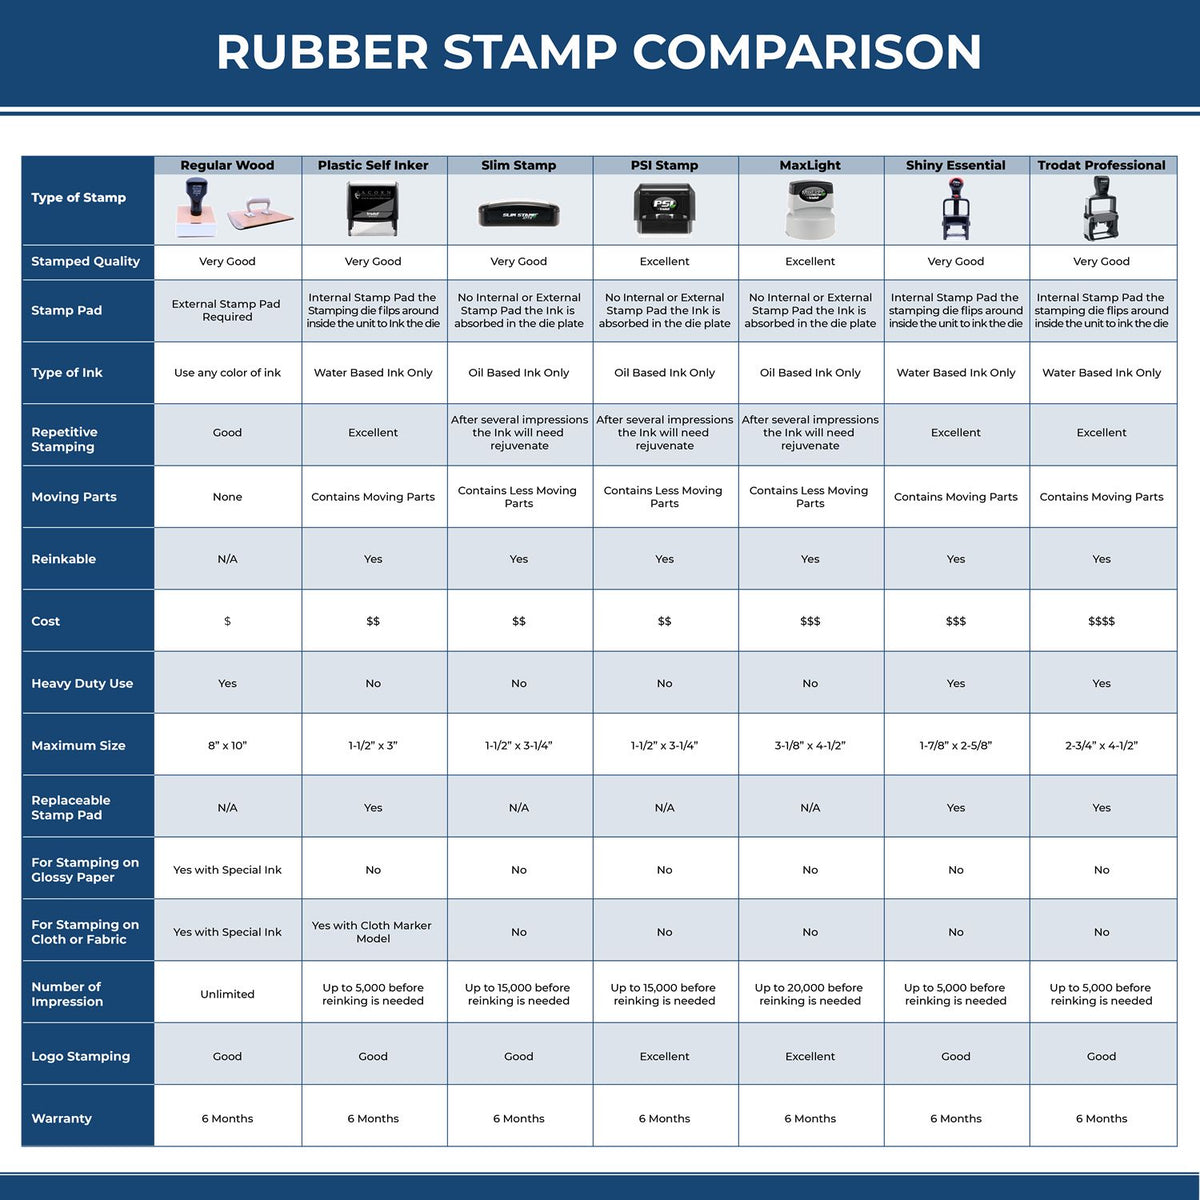 A comparison chart for the different types of mount models available for the Self-Inking North Dakota PE Stamp.